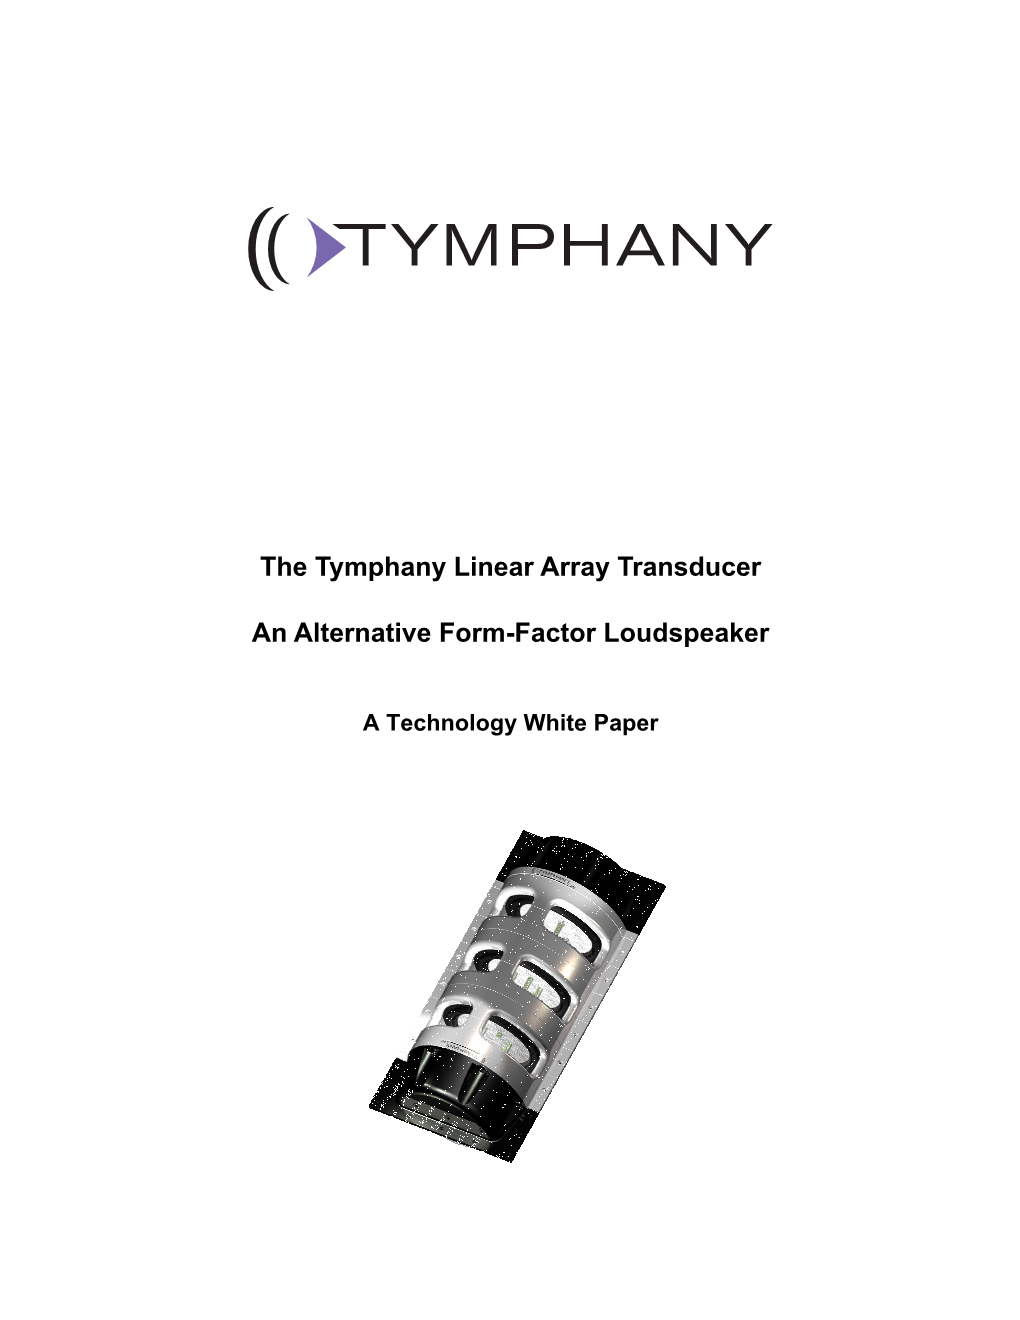 The Tymphany Linear Array Transducer an Alternative Form-Factor Loudspeaker